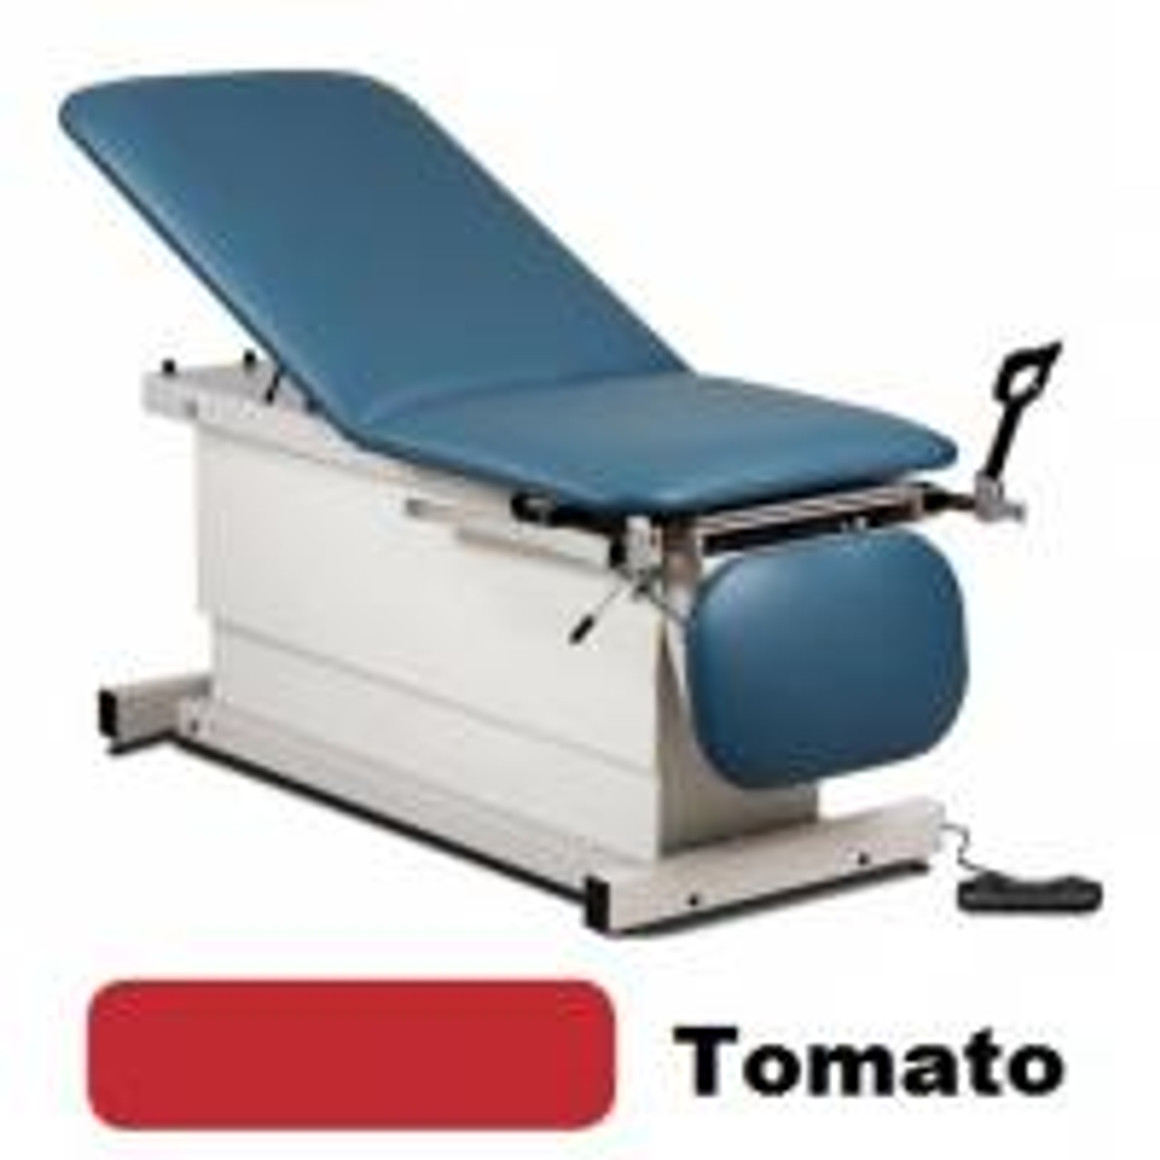 Clinton Shrouded Power Table with Stirrups, Adjustable Backrest & Drop Section, Tomato